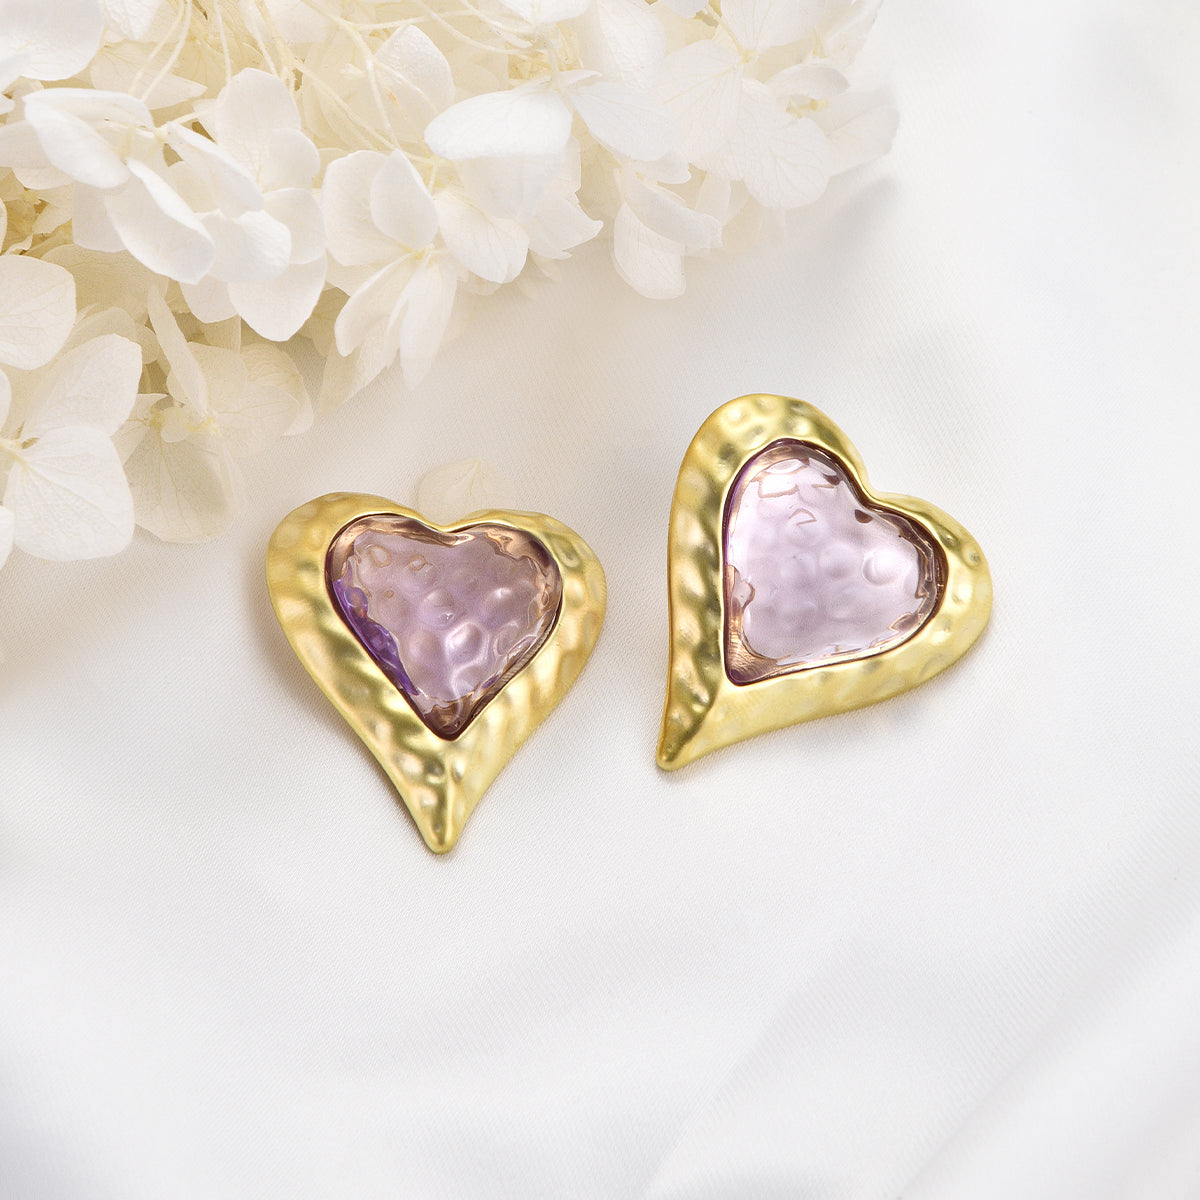 Cheerful pinkish earrings on golden heart shaped canvas